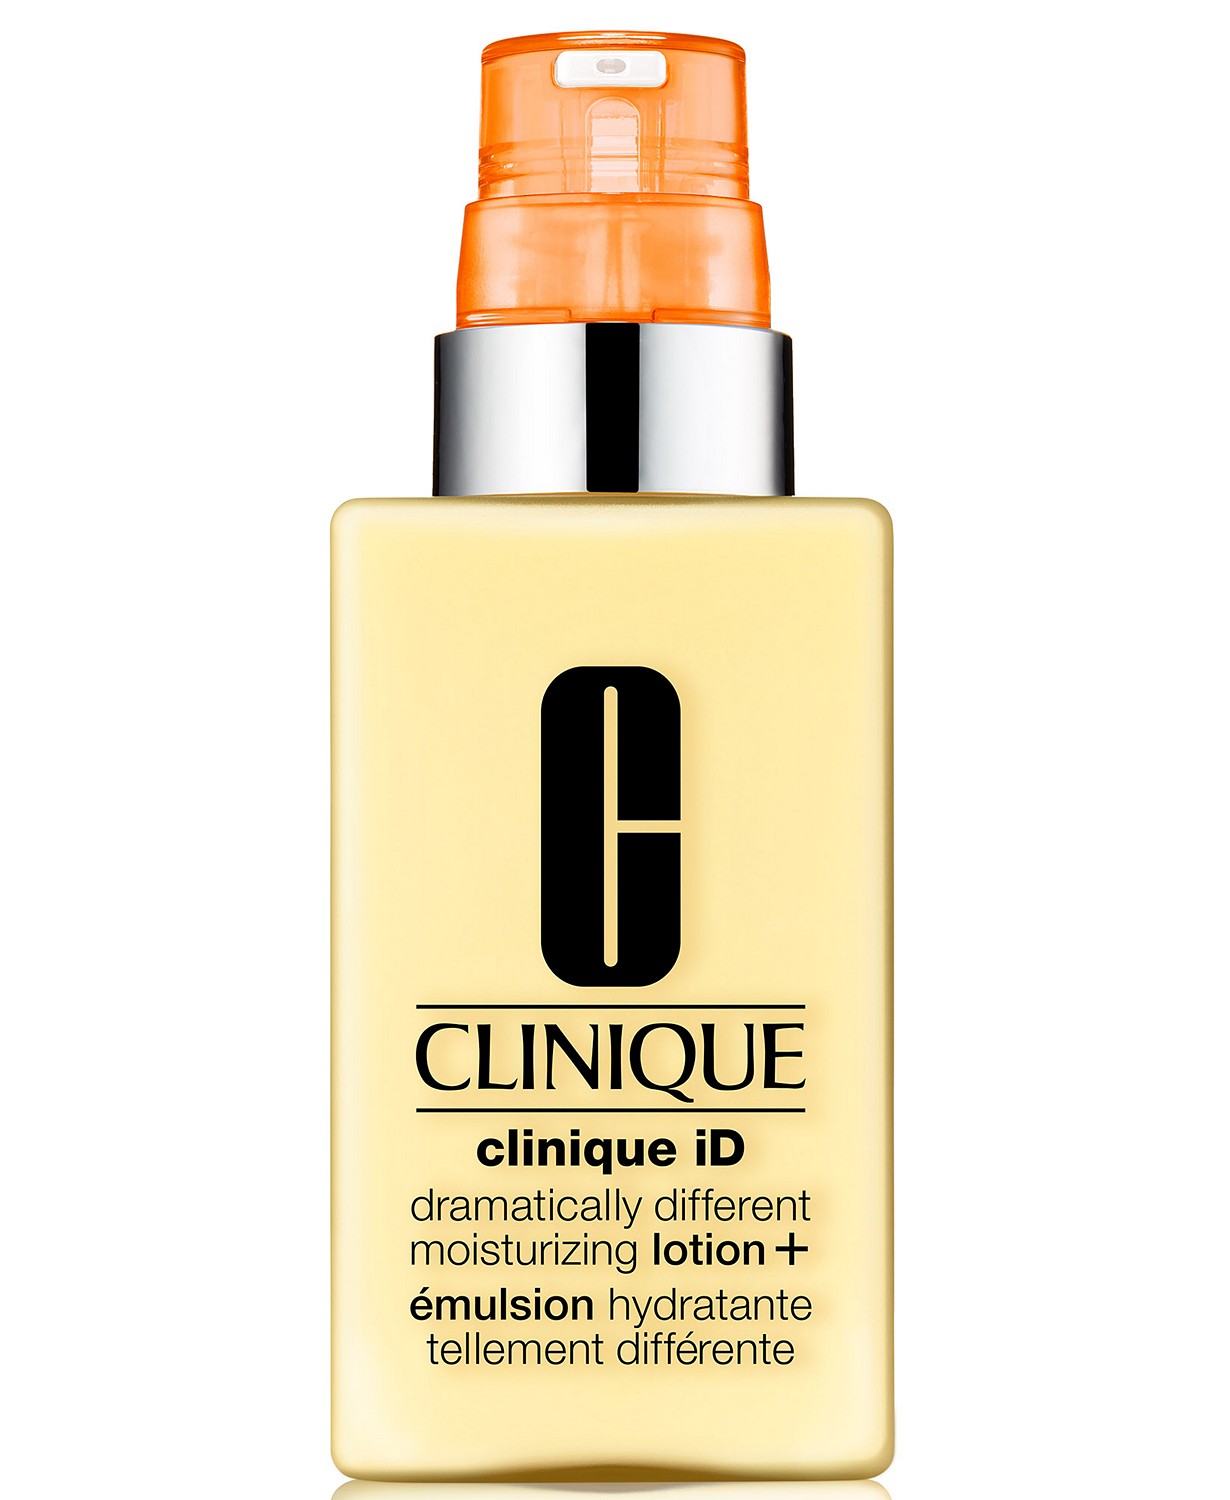 Clinique iD Dramatically Different Moisturizing Lotion+ With Active Cartridge Concentrate™ For Fatigue, 4.2 oz.